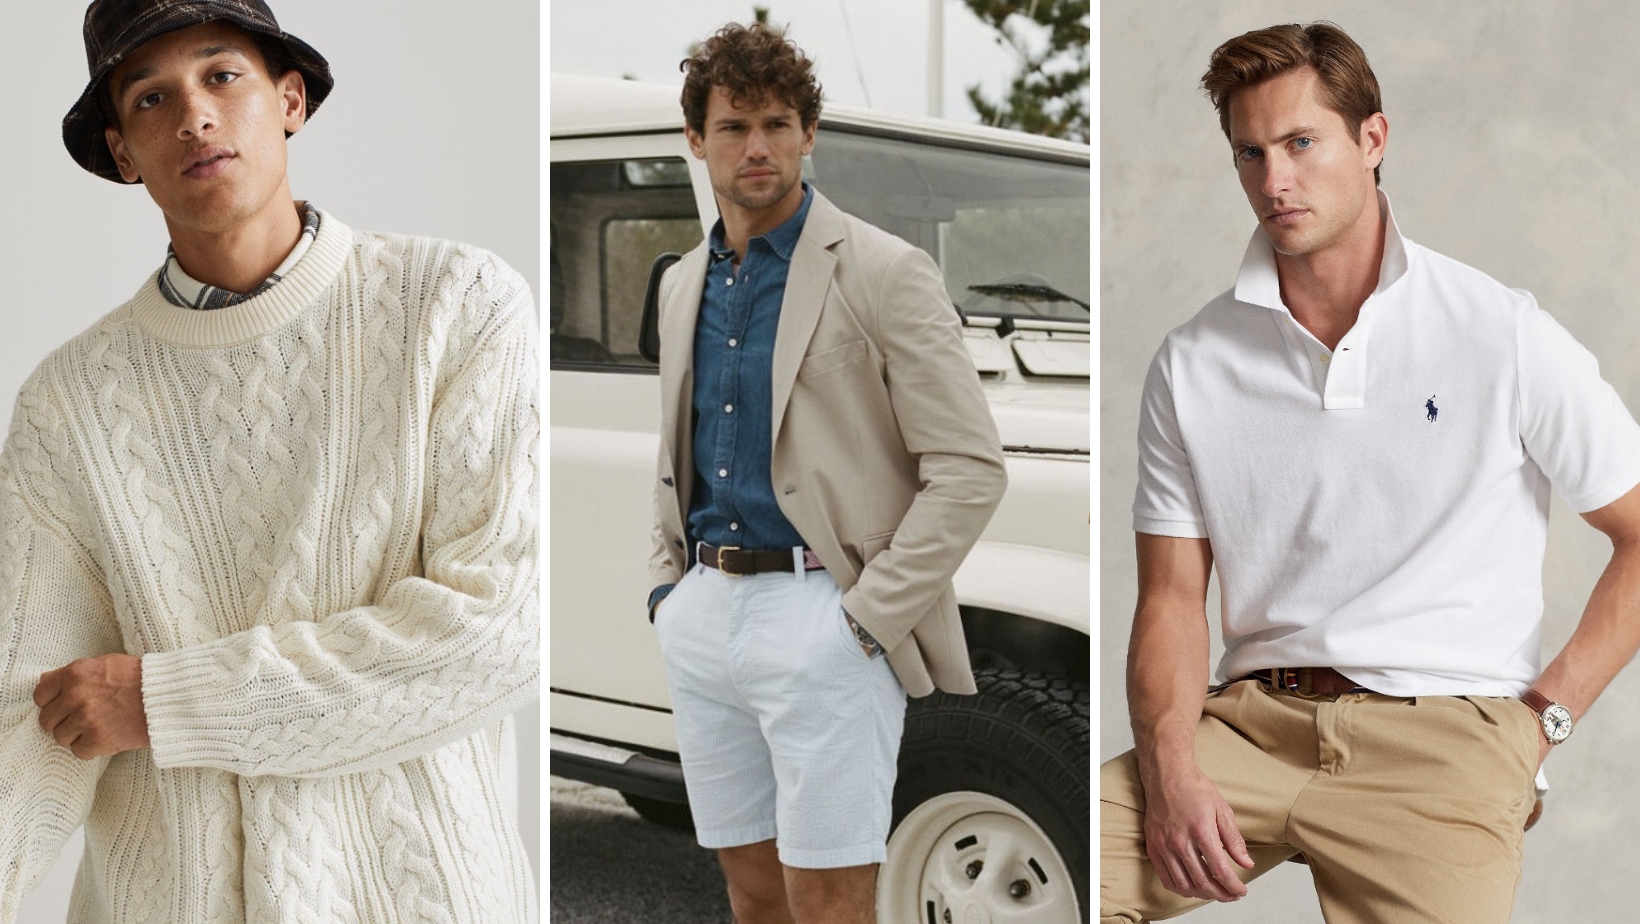 The Cool Clothes and Preppy Style of Martha's Vineyard